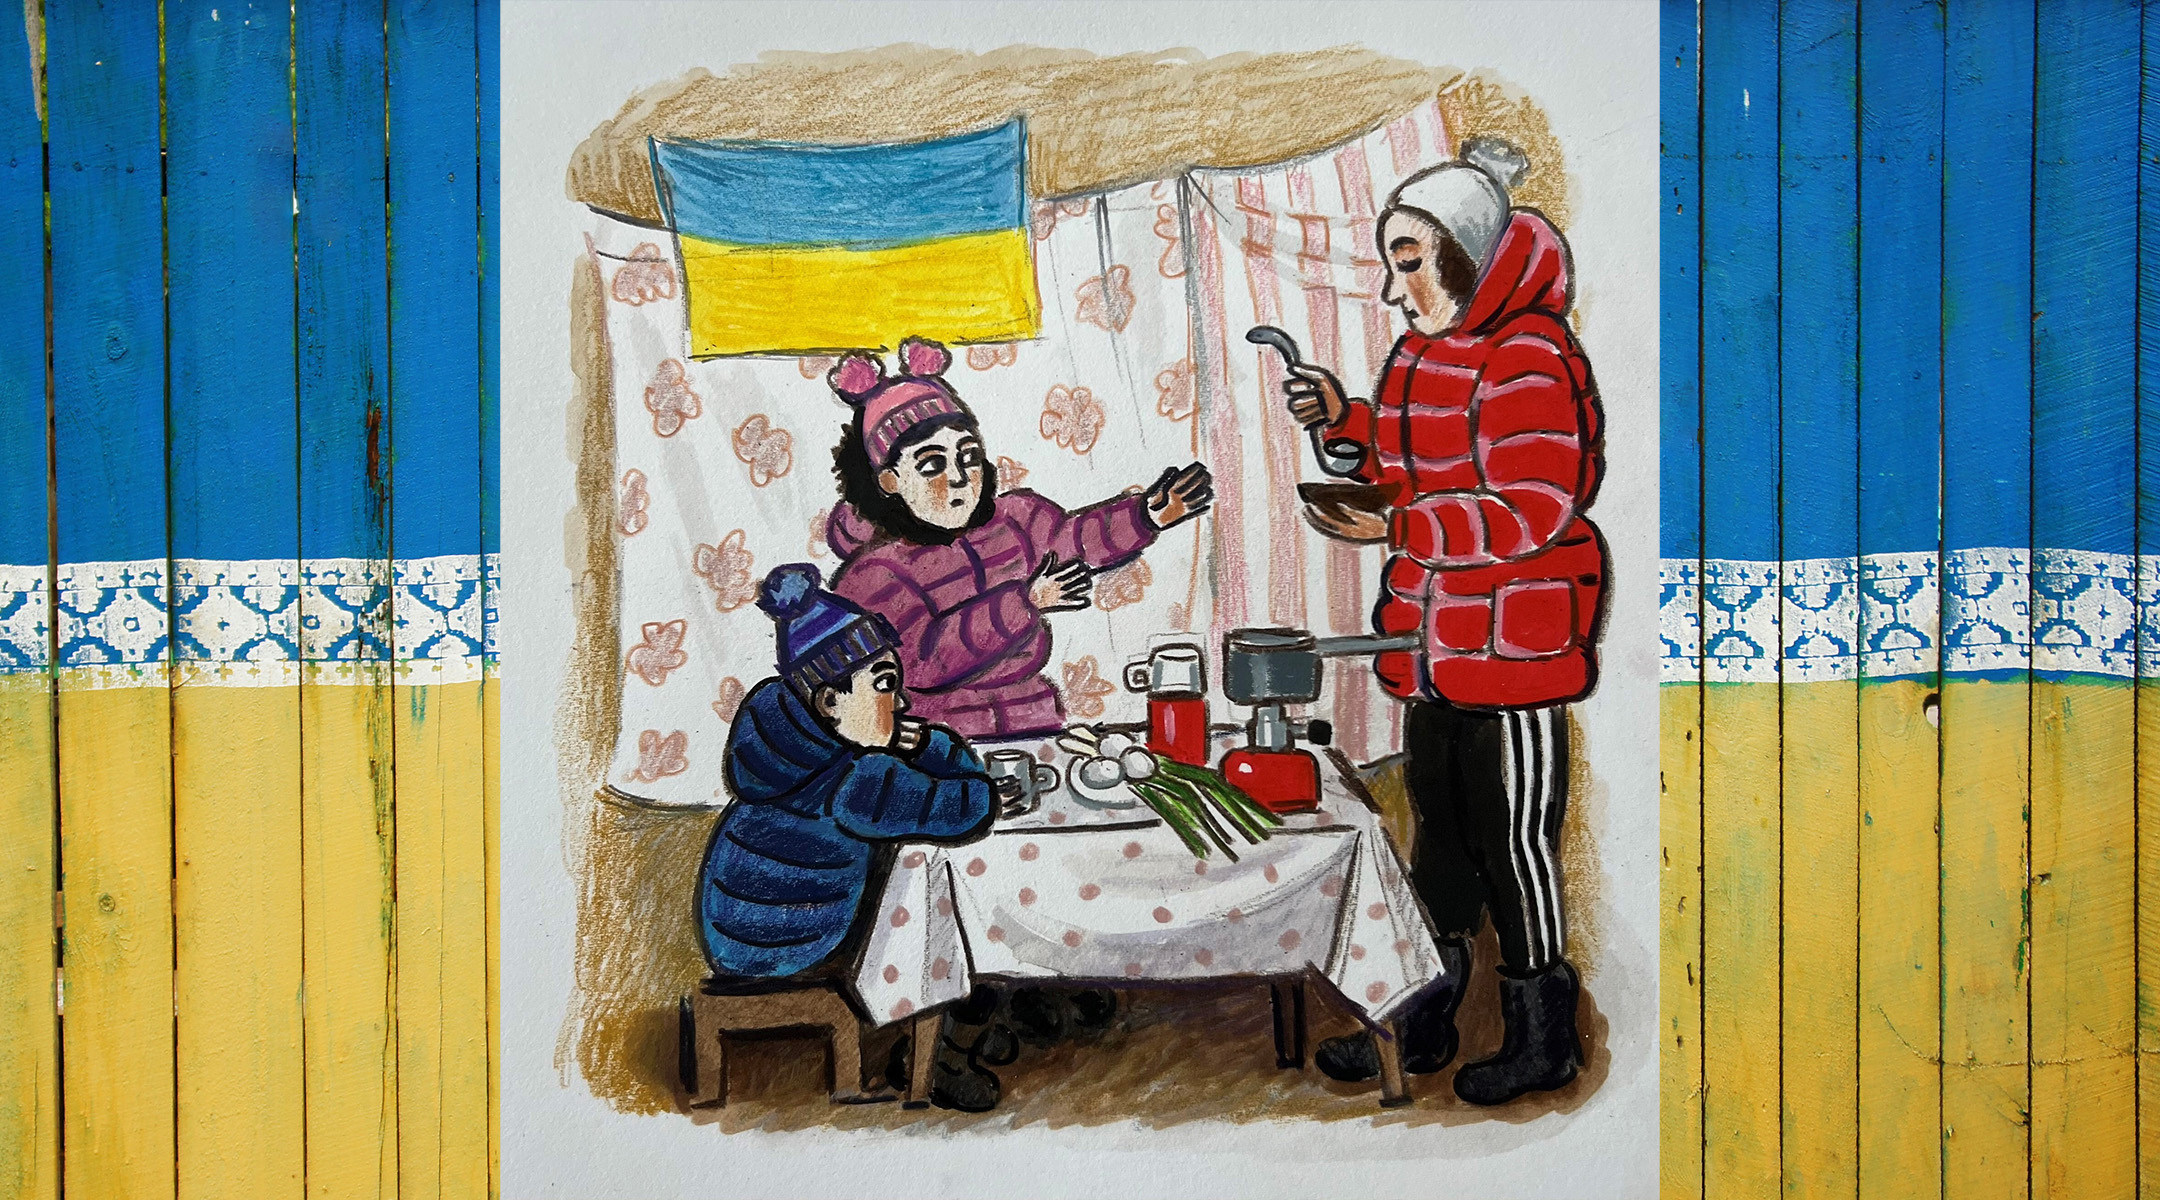 The first Passover haggadah in Ukrainian marks a community’s break with Russia